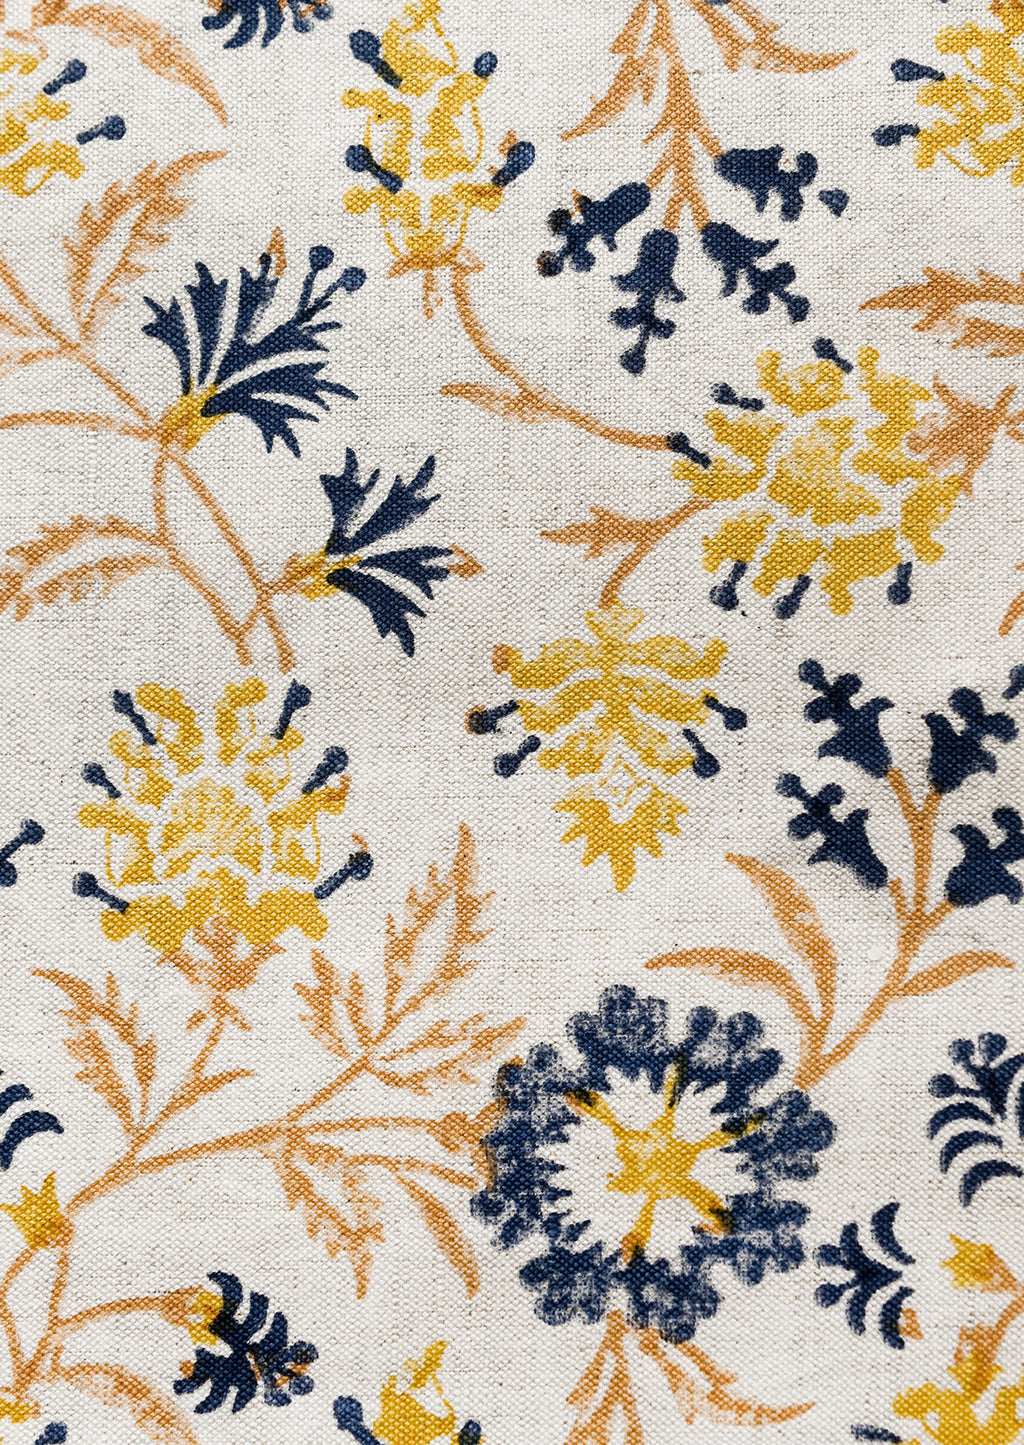 3: A block printed pillow in navy, brown and yellow floral print on natural linen.